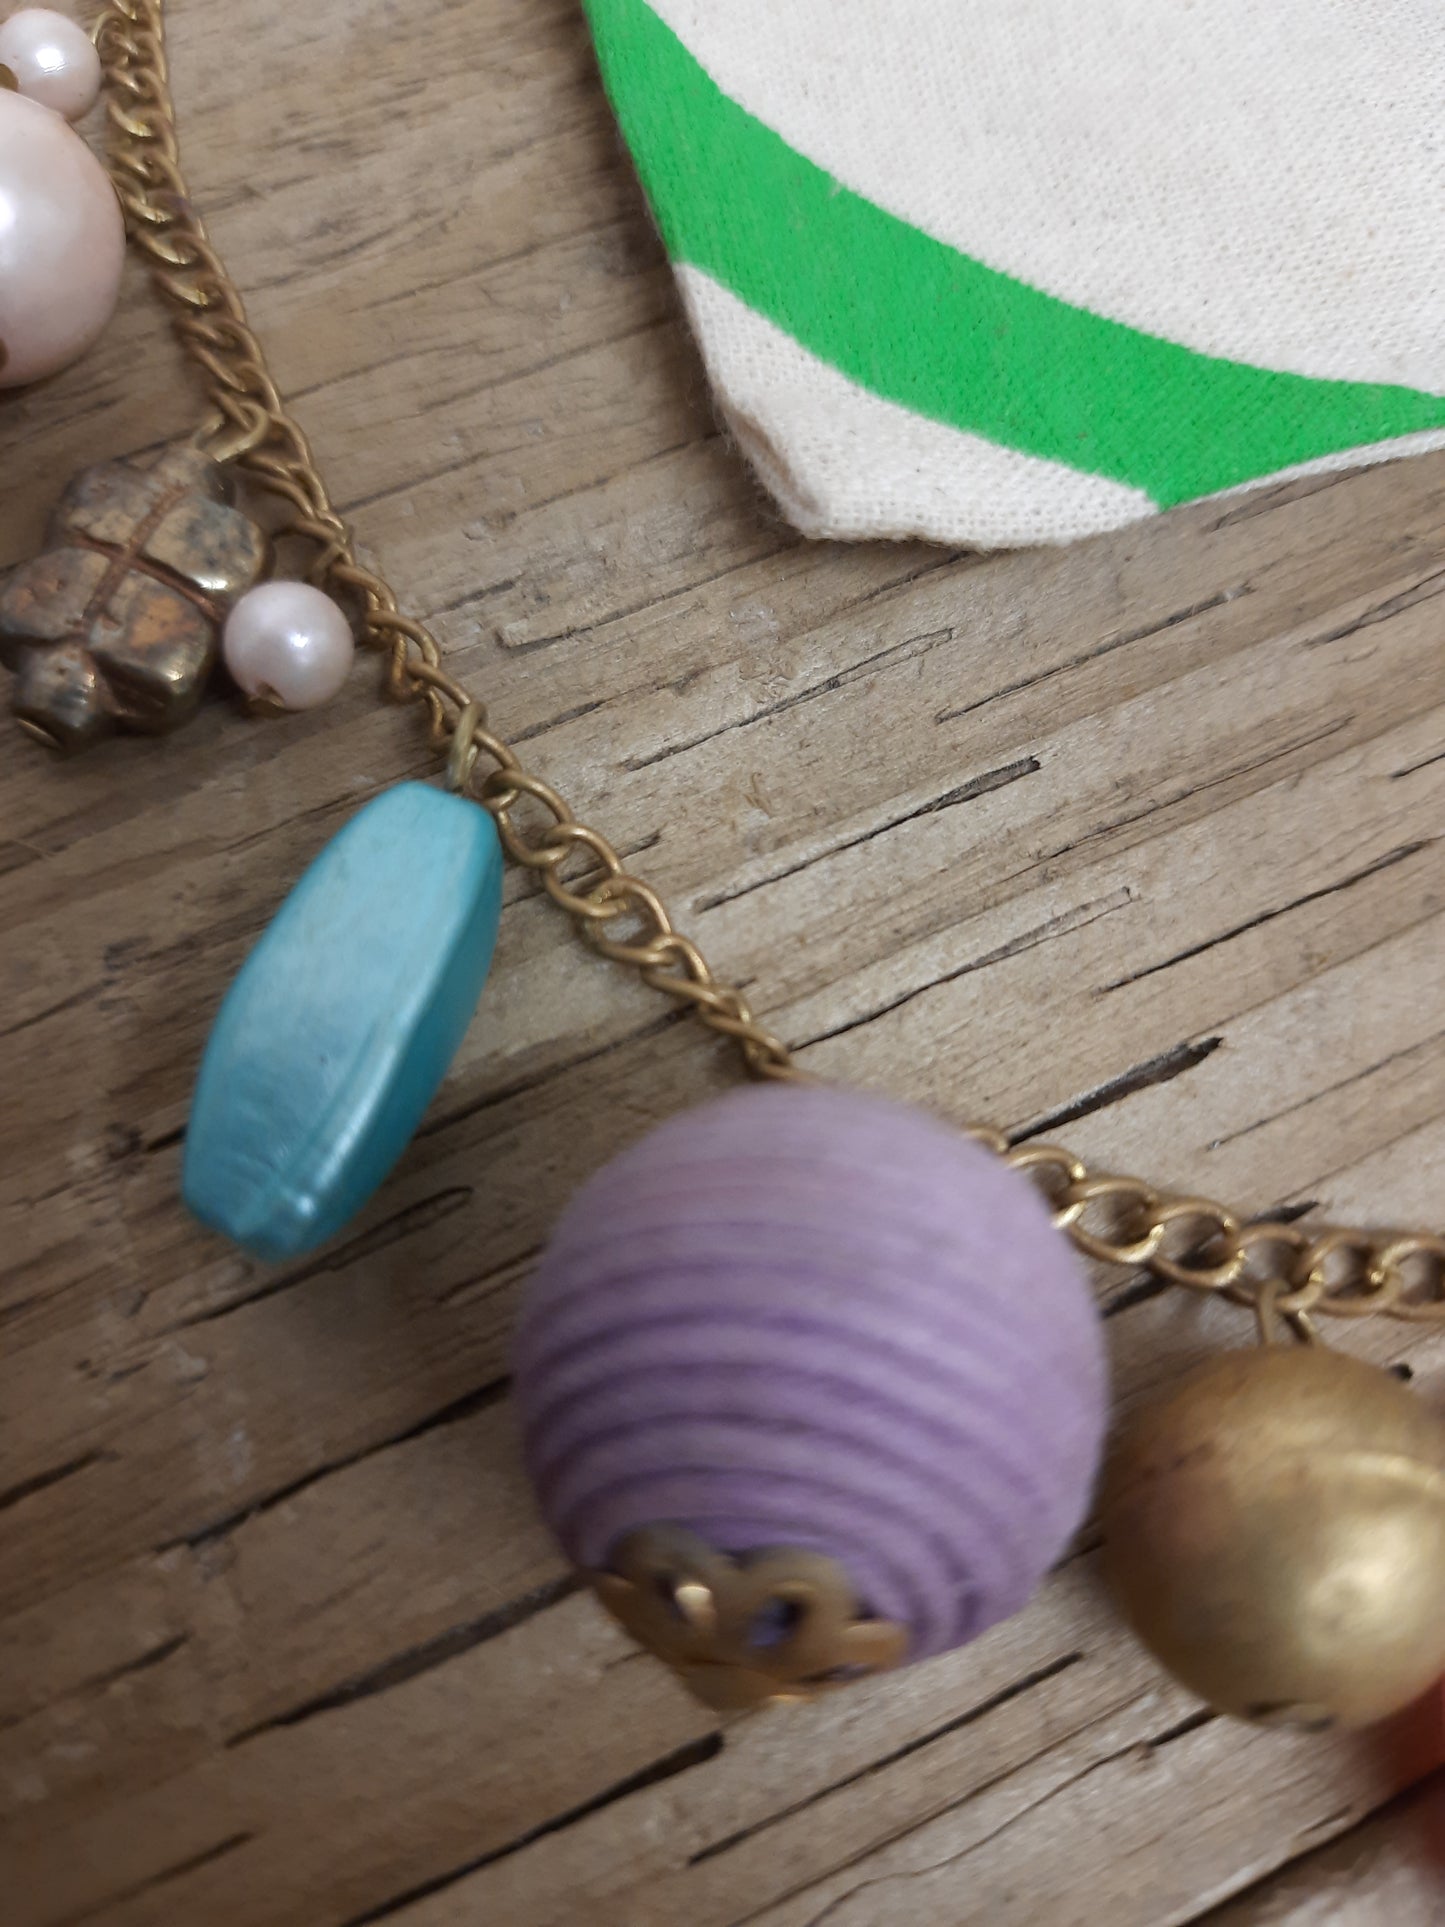 Fair Trade Necklaces, UK Ethical Jewellery, Ethical Shopping, Eco Friendly Shop, BIG GREEN APPLE